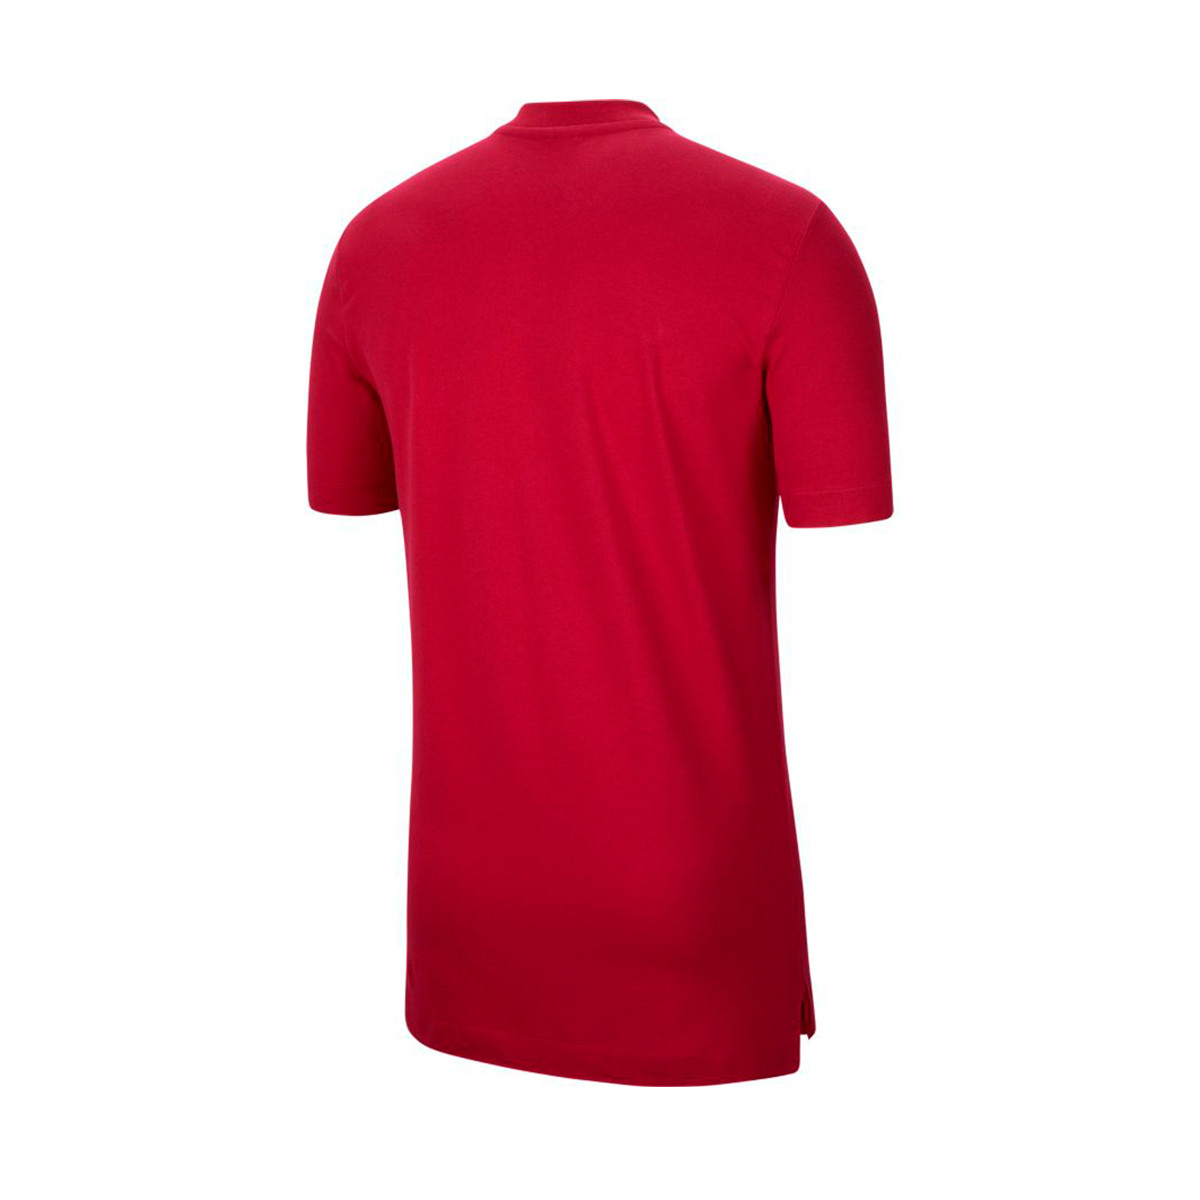 nike noble red shirt